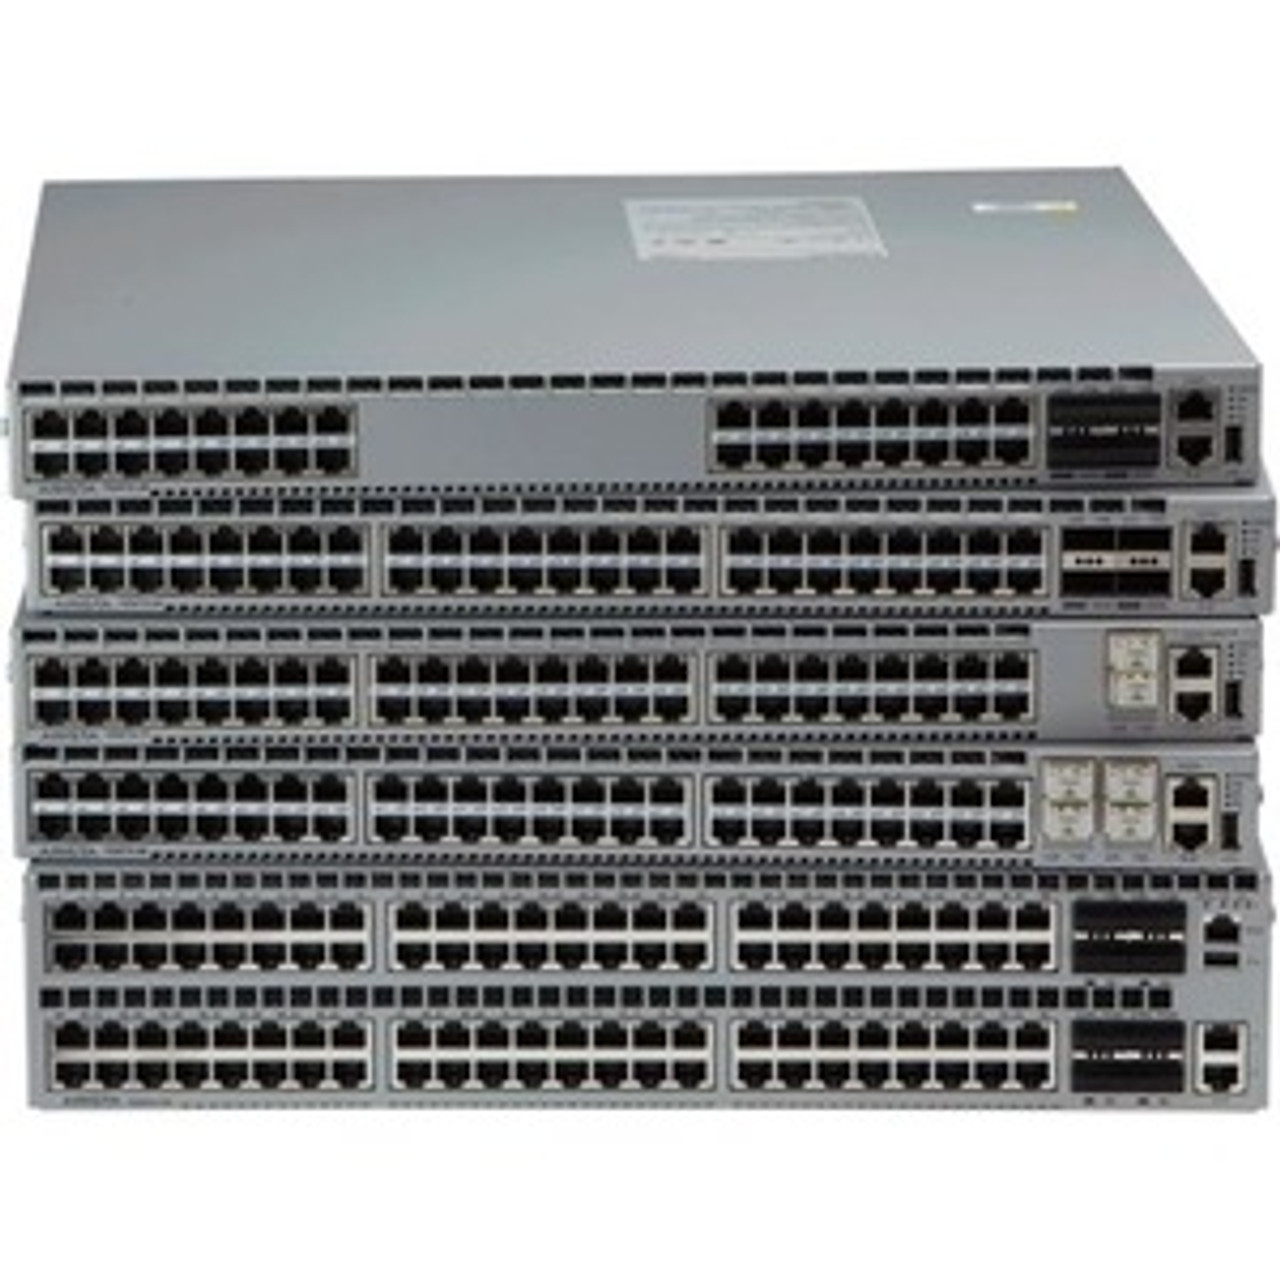 DCS-7050TX2-128-R Arista Networks 7050TX2-128 Layer 3 Switch - 96 Ports - Manageable - 40 Gigabit Ethernet, 10 Gigabit Ethernet - 40GBase-X, 10GBase-T - 3 Layer